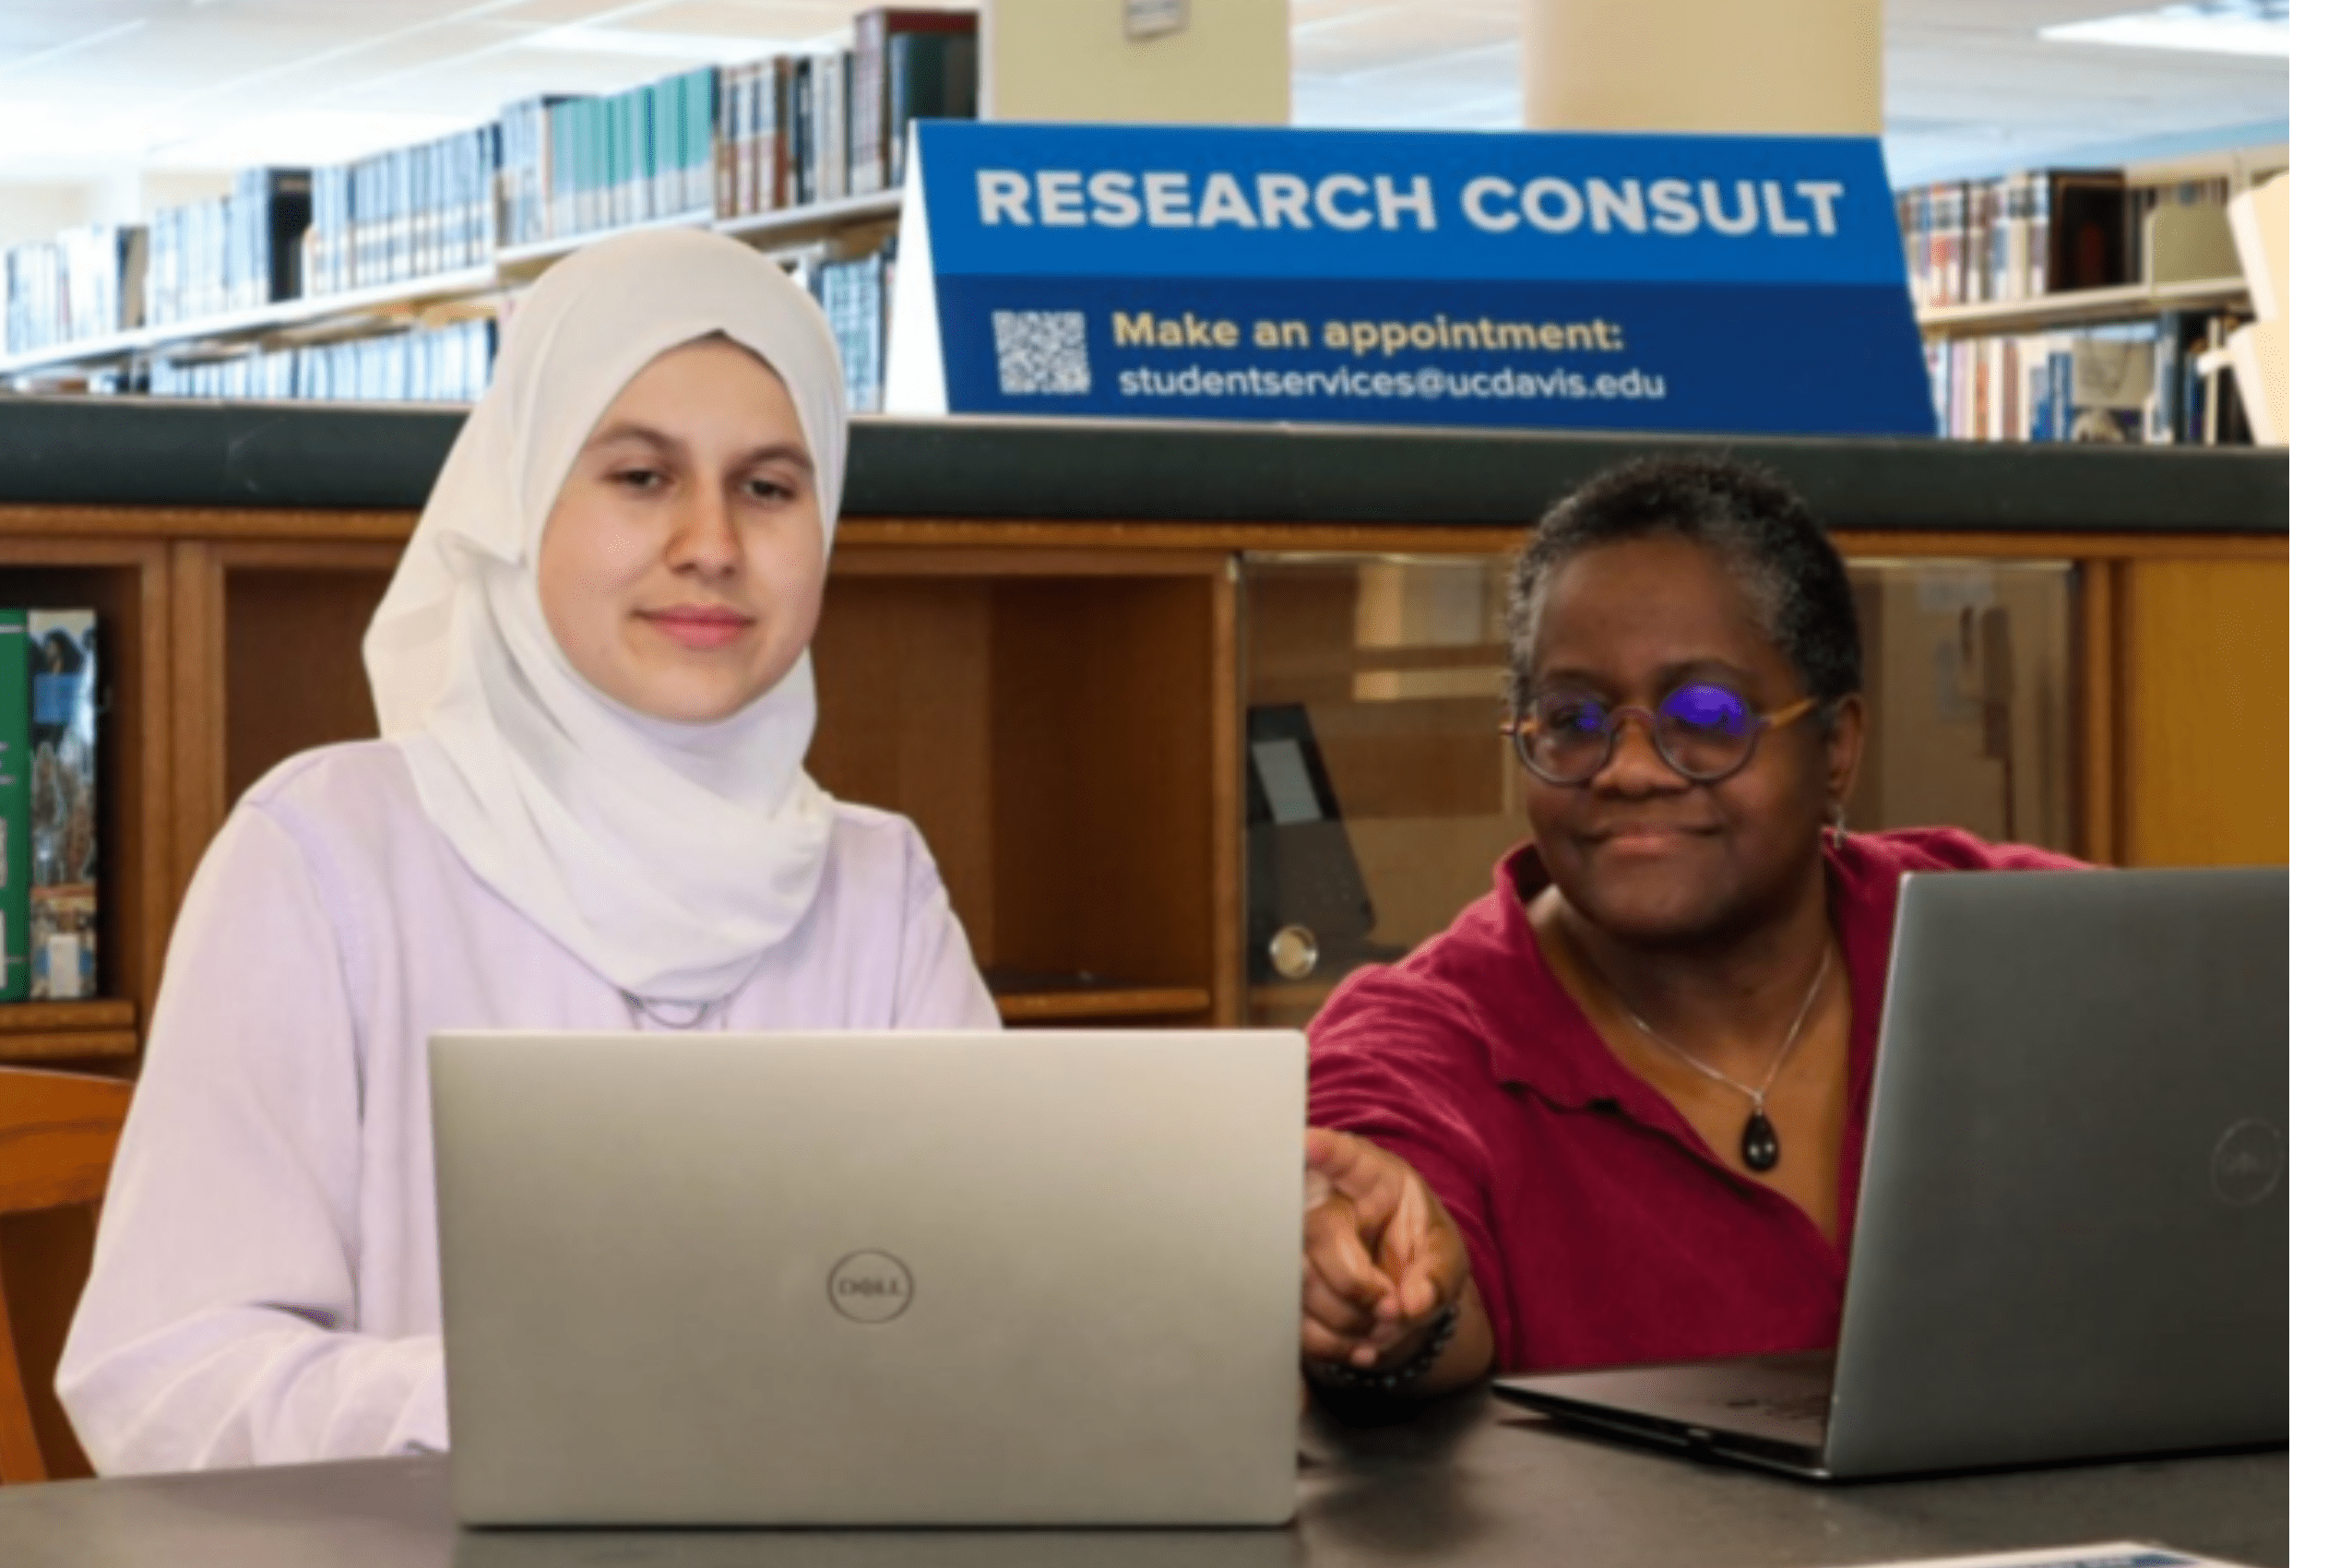 research consultation between student and librarian